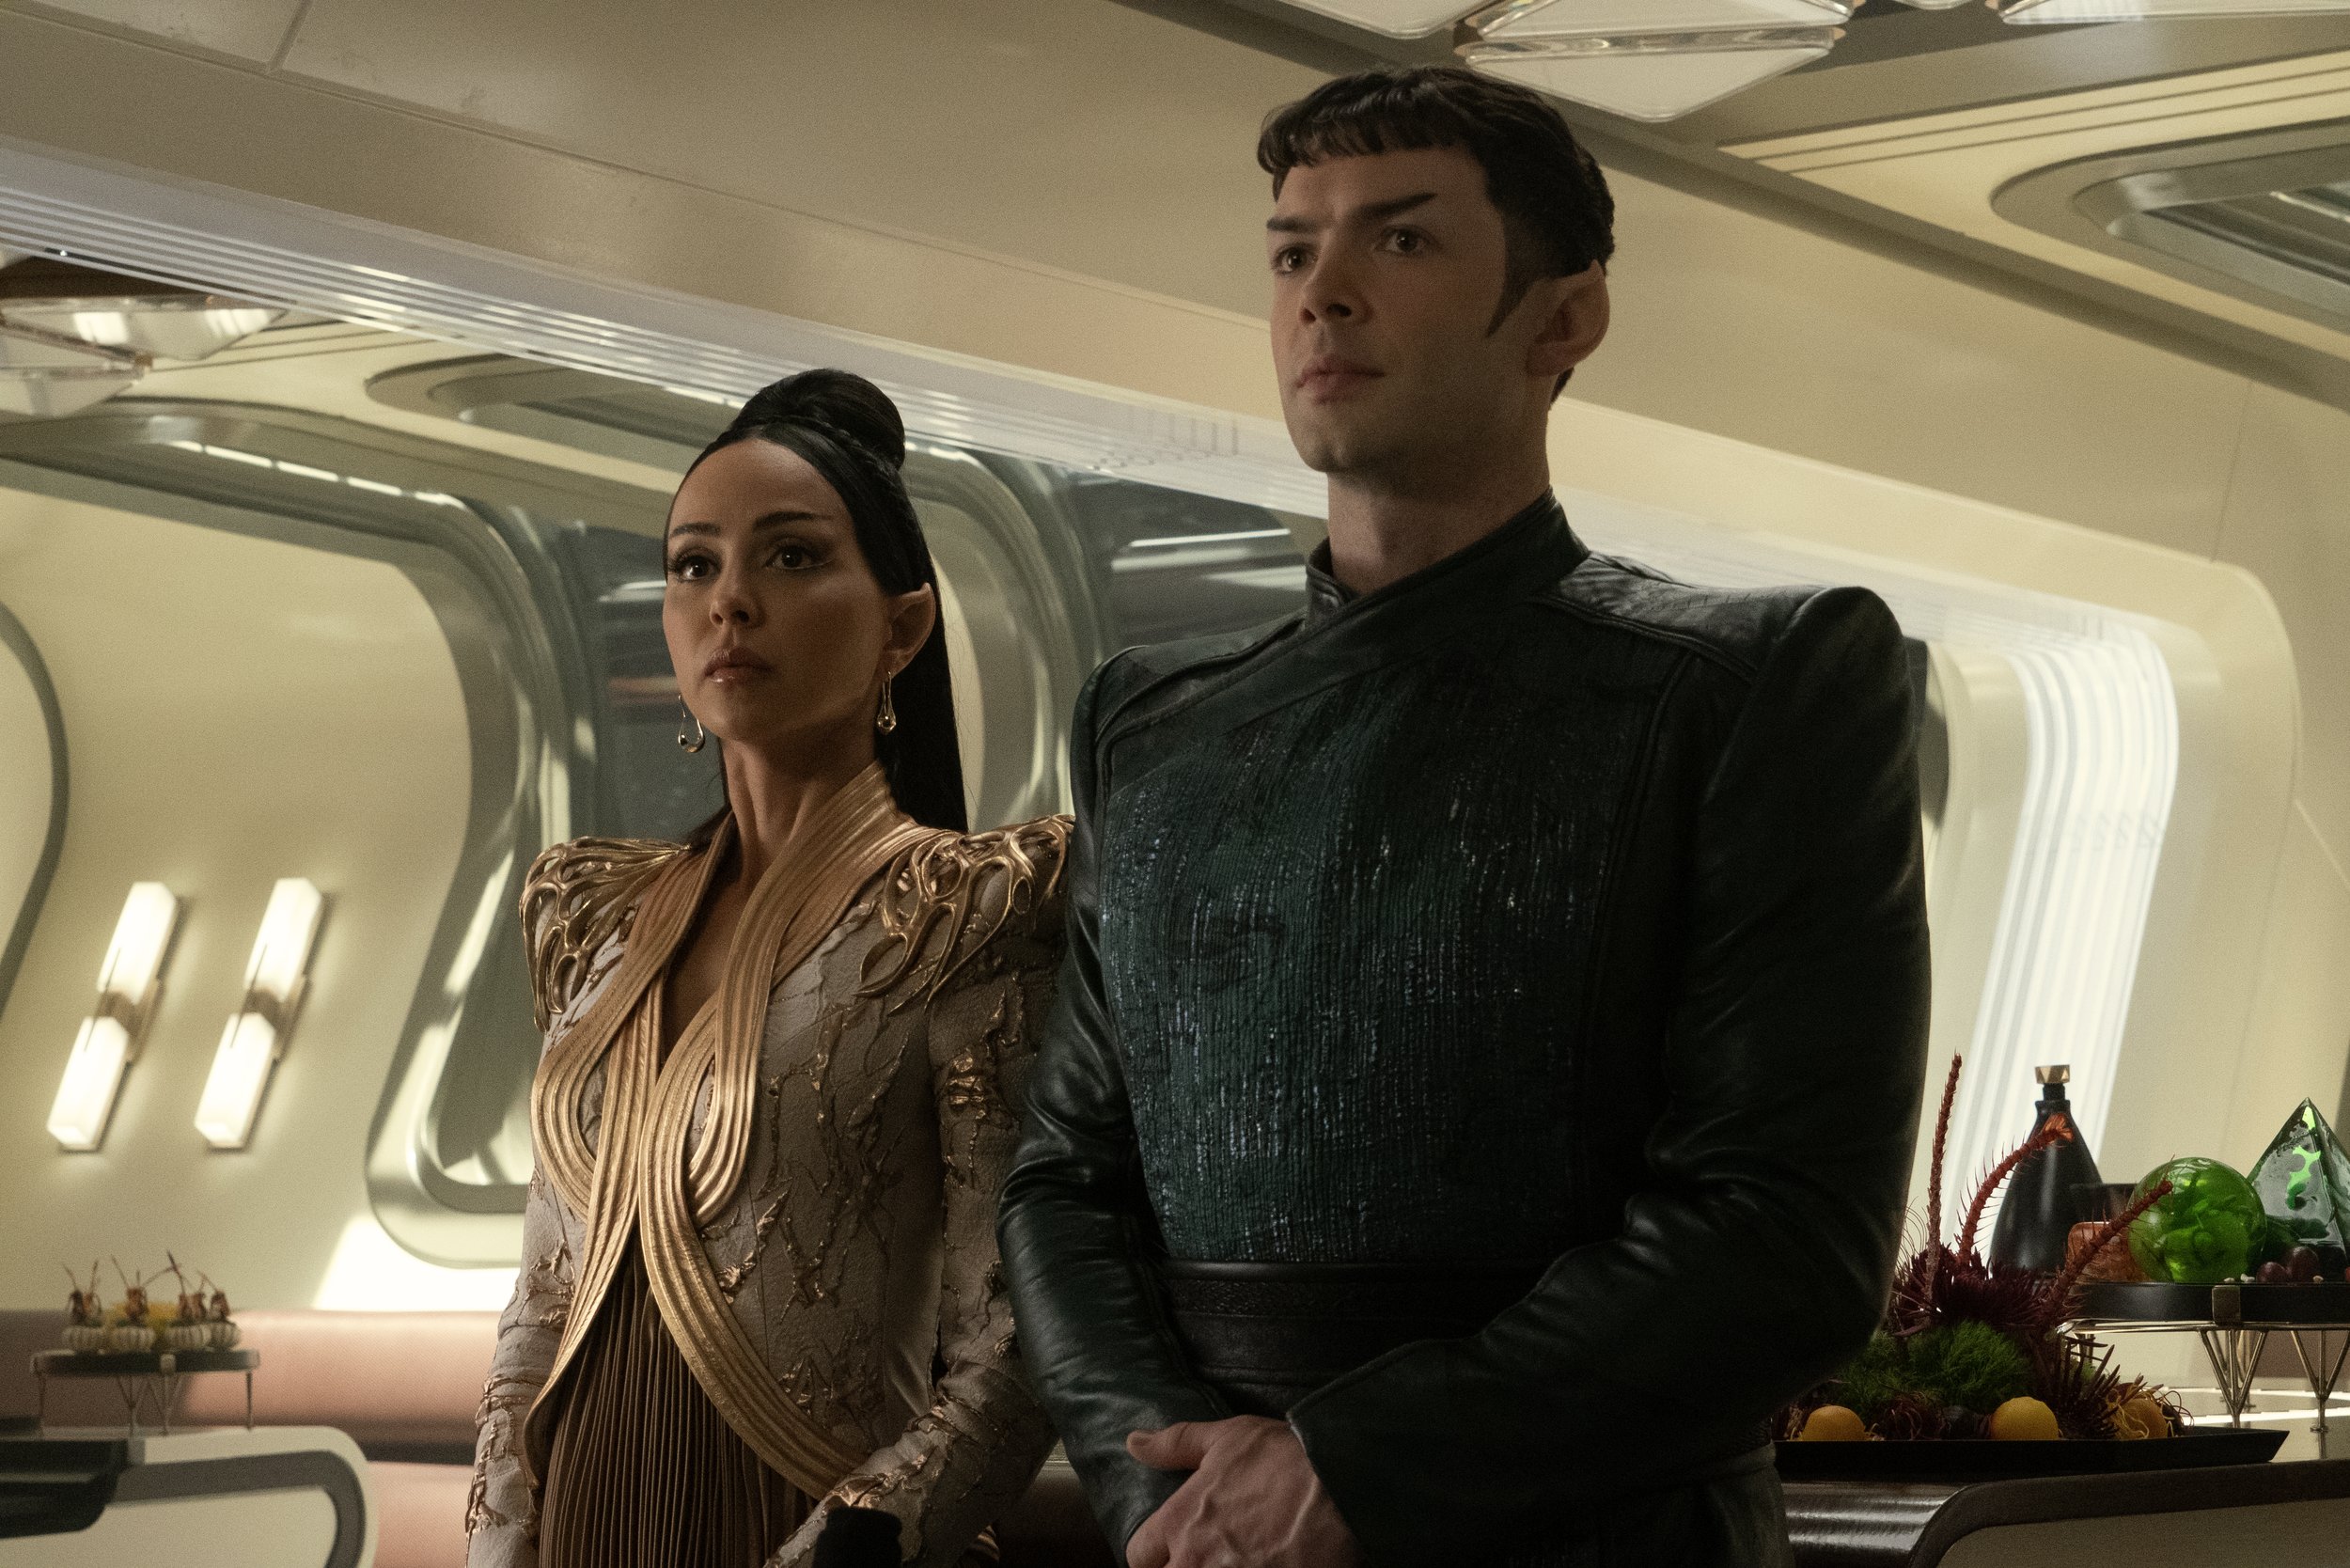   Gia Sandhu  as T'Pring and  Ethan Peck  as Spock. Photo Credit: Michael Gibson/Paramount+ 